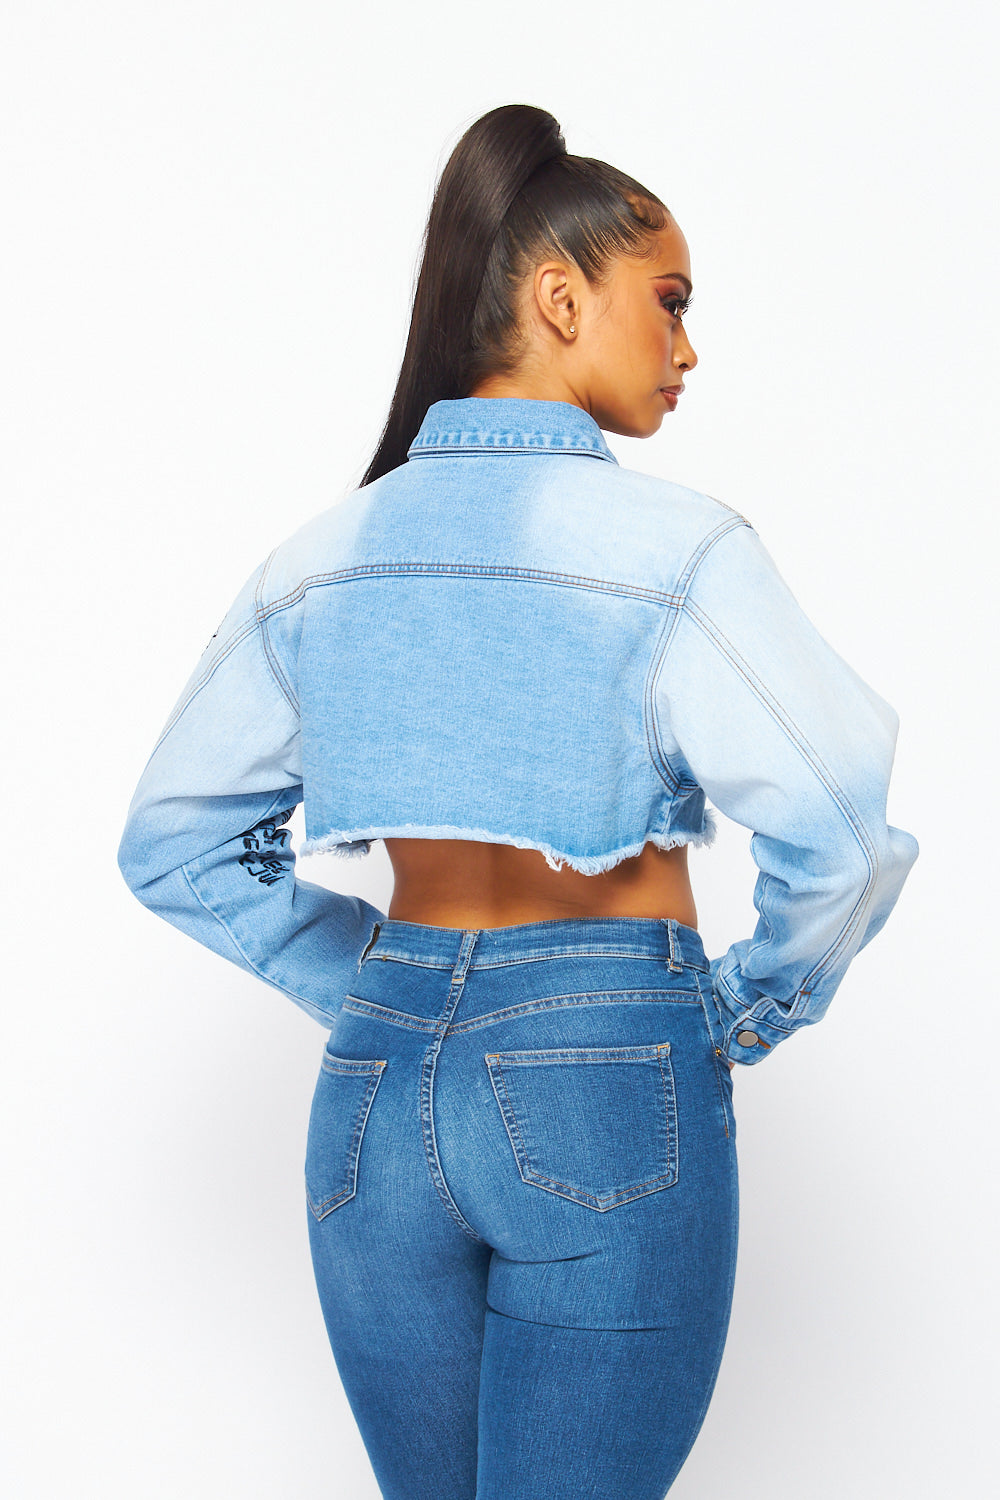 Walk That Talk Cropped Denim Jacket with Lettering